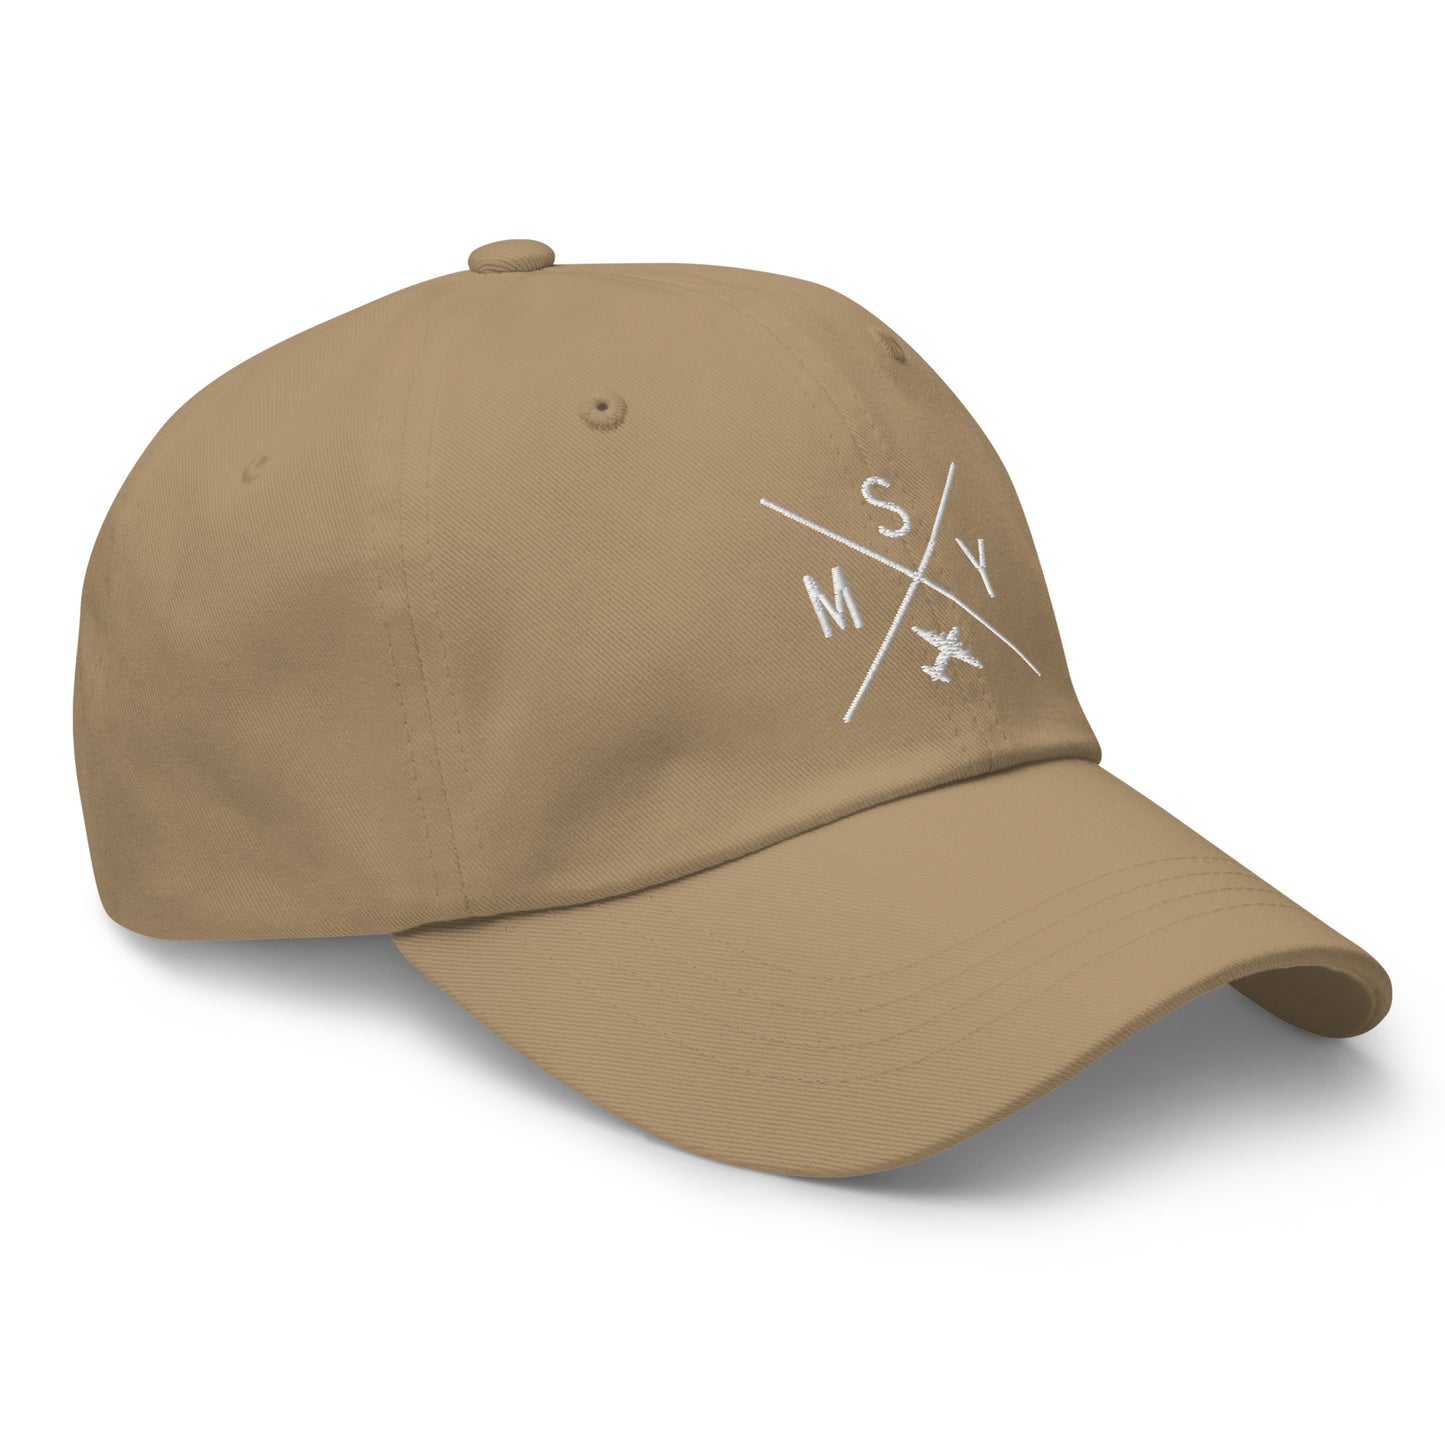 Crossed-X Dad Hat - White • MSY New Orleans • YHM Designs - Image 23